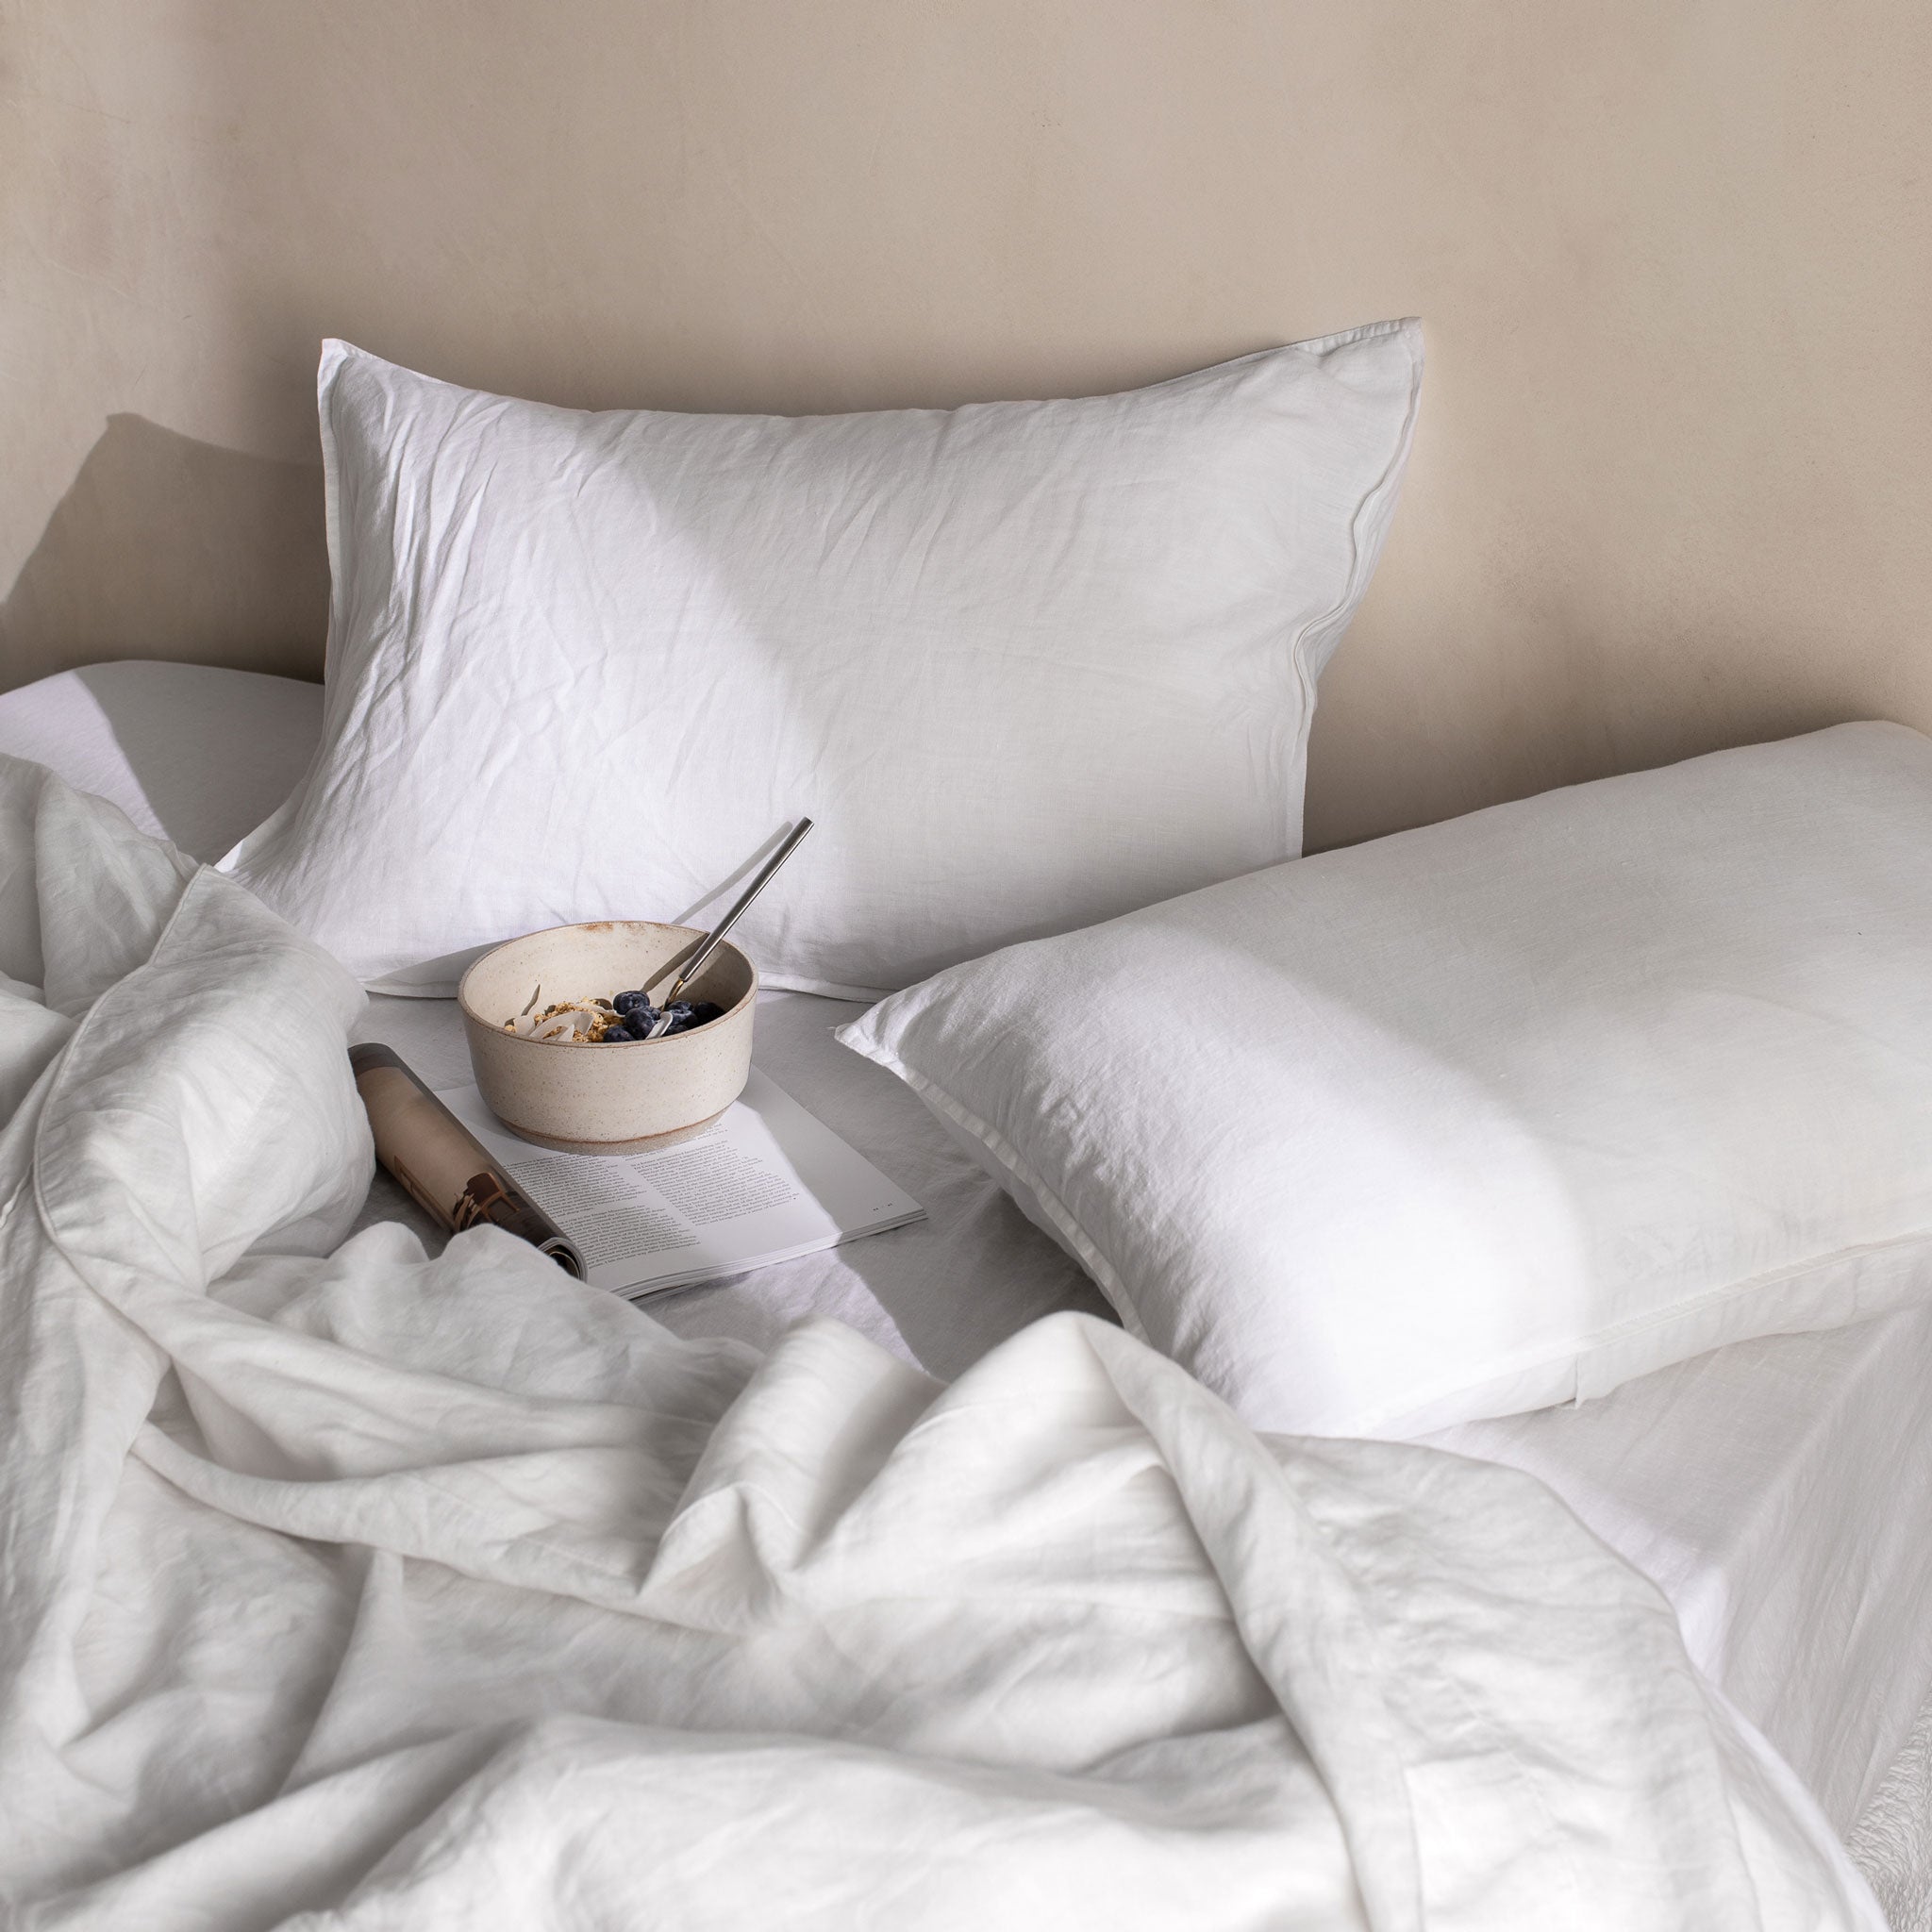 Linen bedding: What are the benefits?